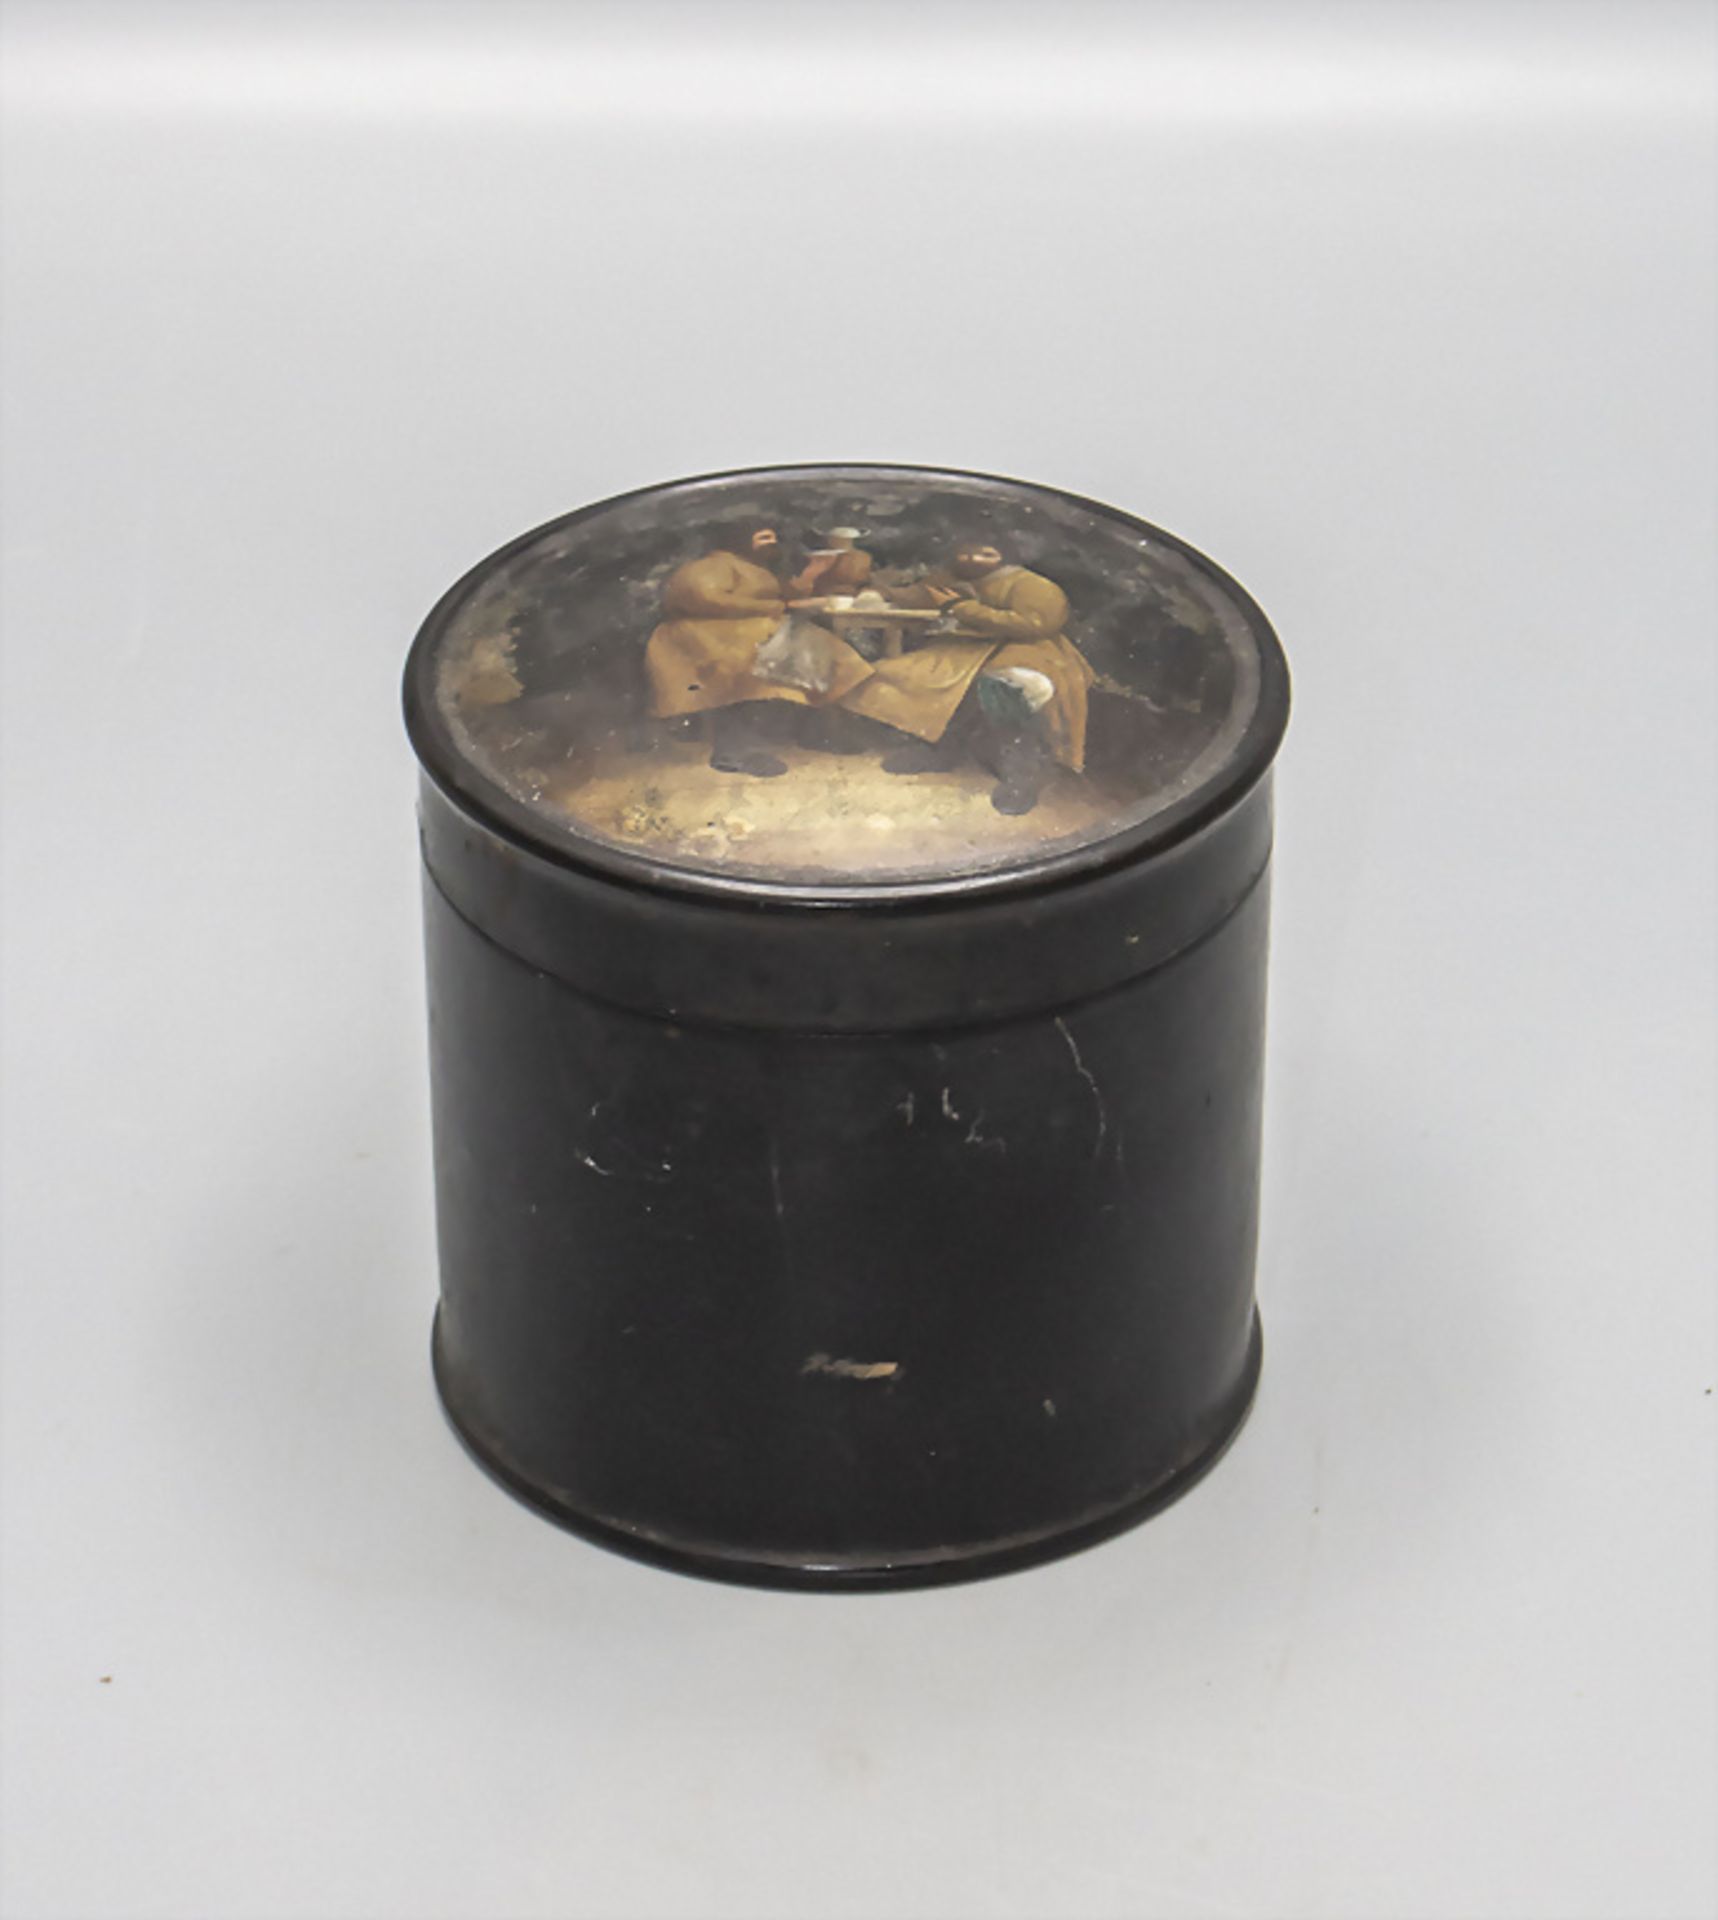 Lackteedose mit Genreszene 'Die Teetrinker' / A lacquered tea caddy with a genre scene 'Tea ...